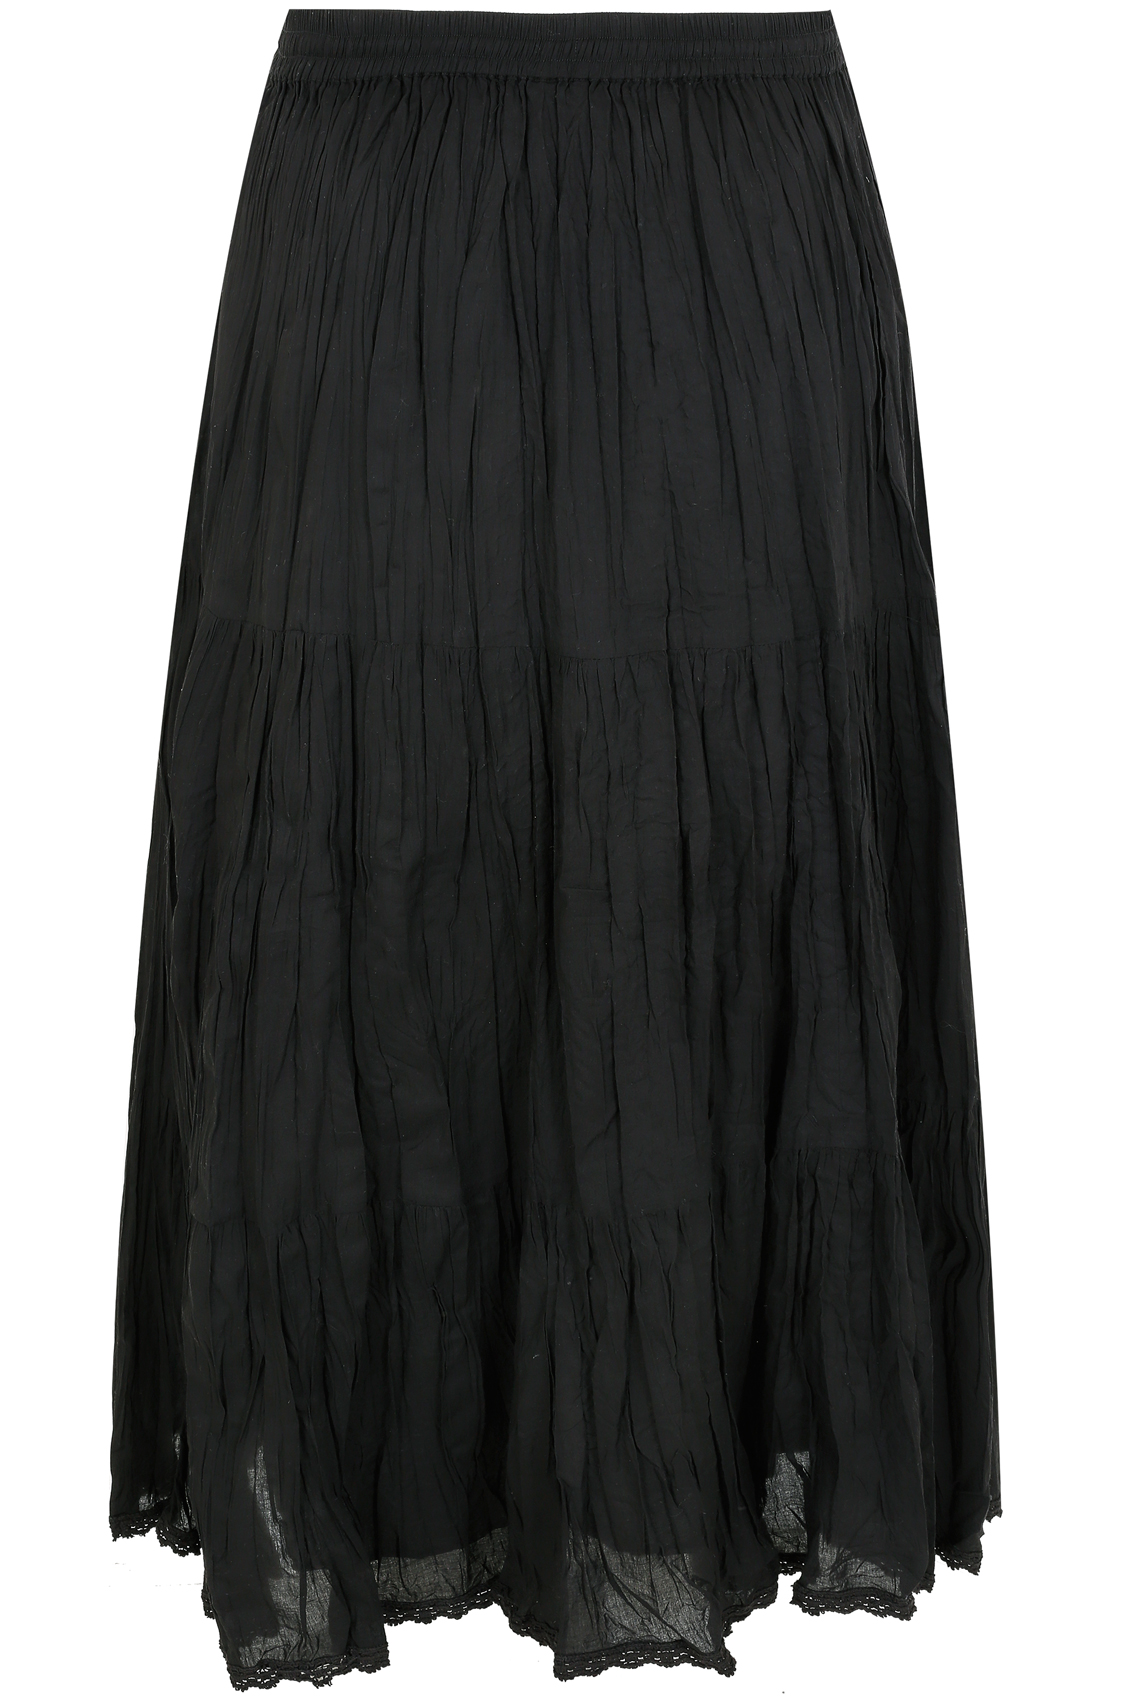 Black Tiered Crinkle Maxi Skirt, Plus size 16 to 36